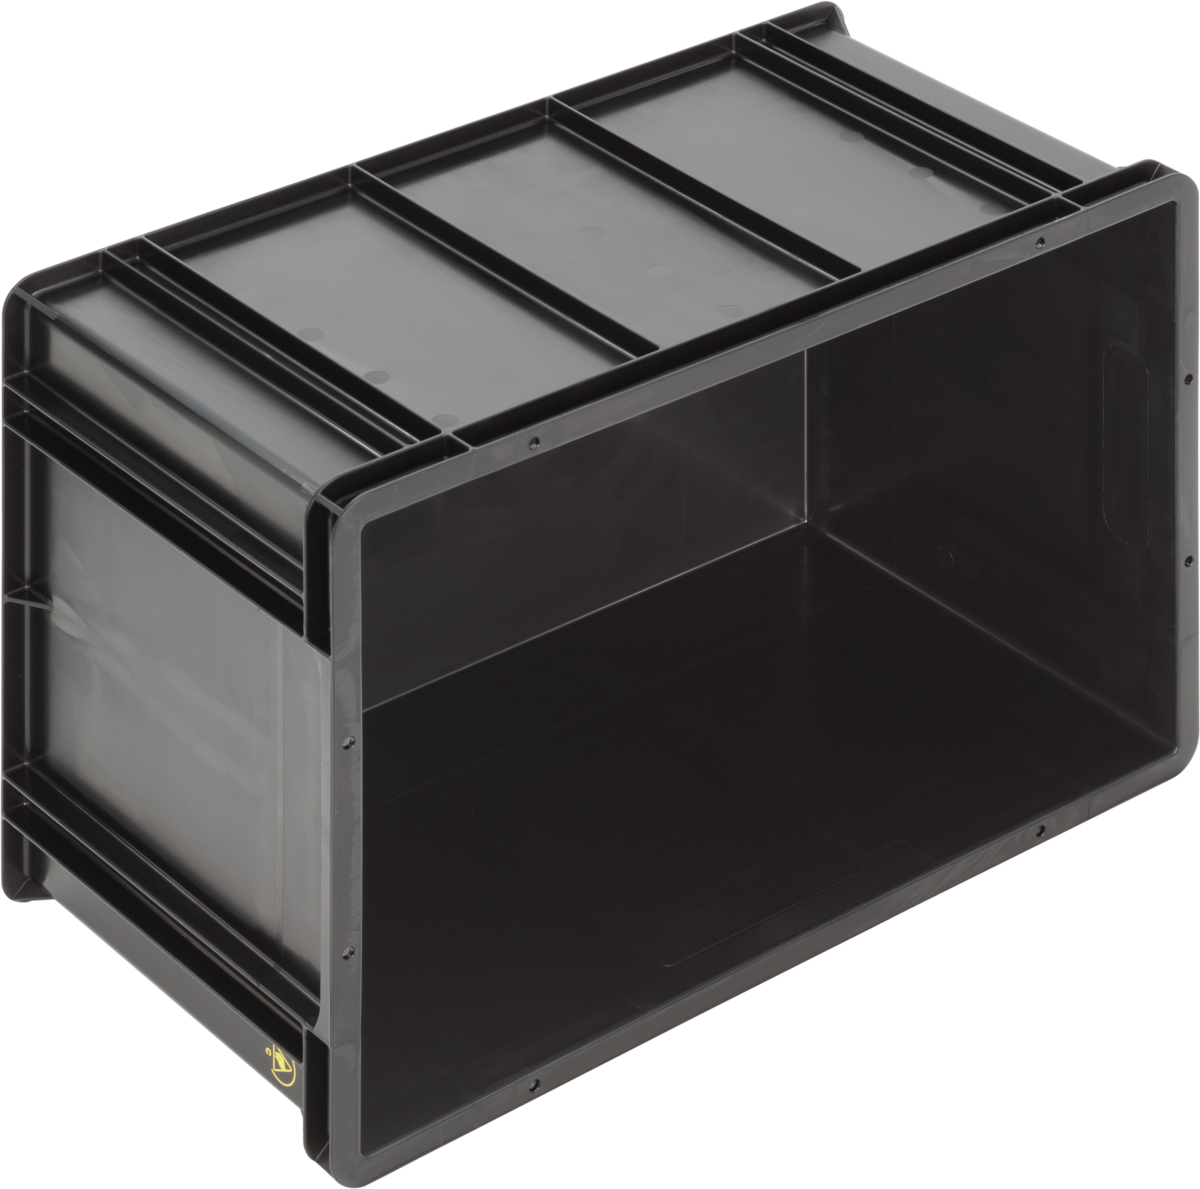 ESD-Safe-SGL-Norm-Stacking-Bin-Containers-Flat-Base-Ref.-6432.007.992_1004519_600x400x320_03